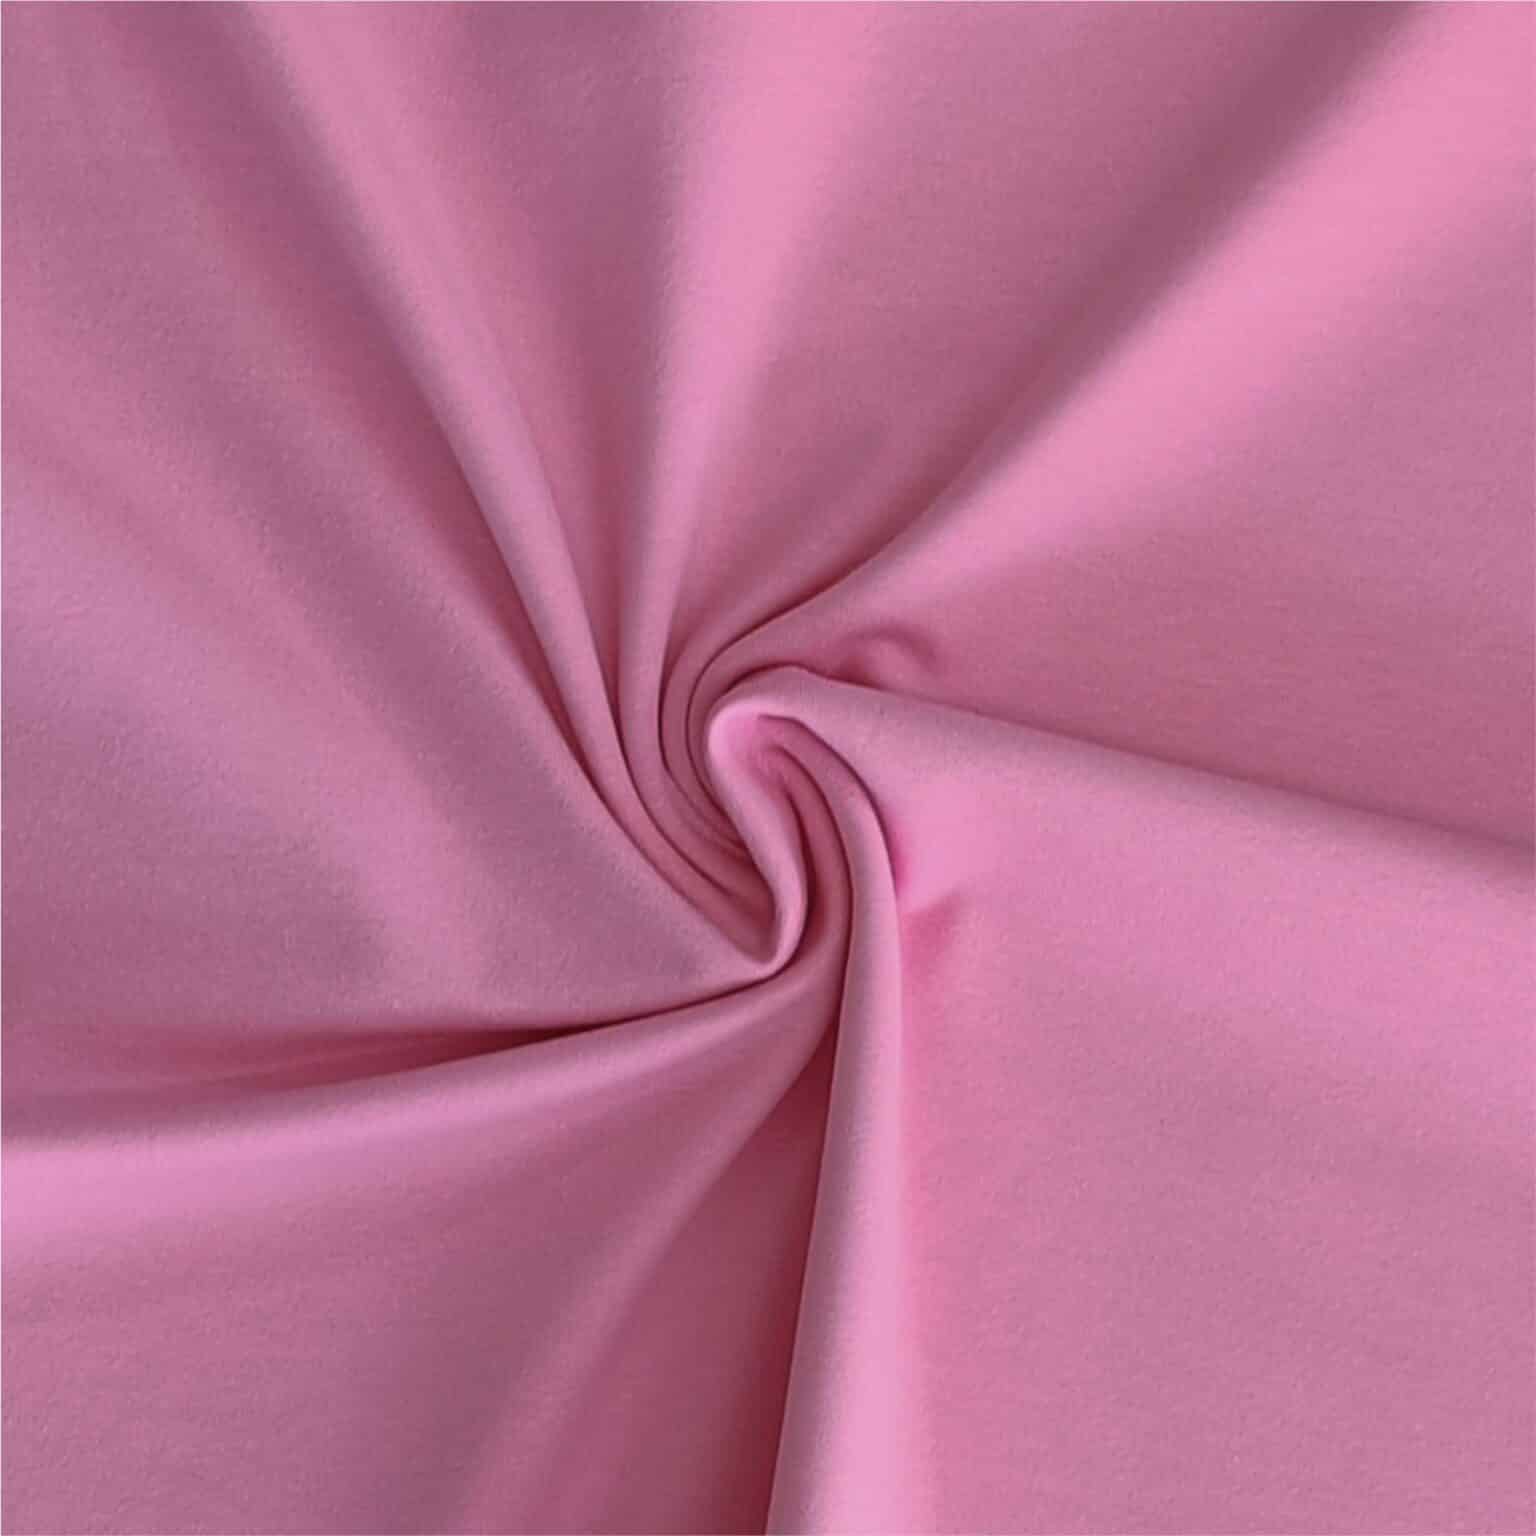 rose pink plain cotton jersey fabric | More Sewing